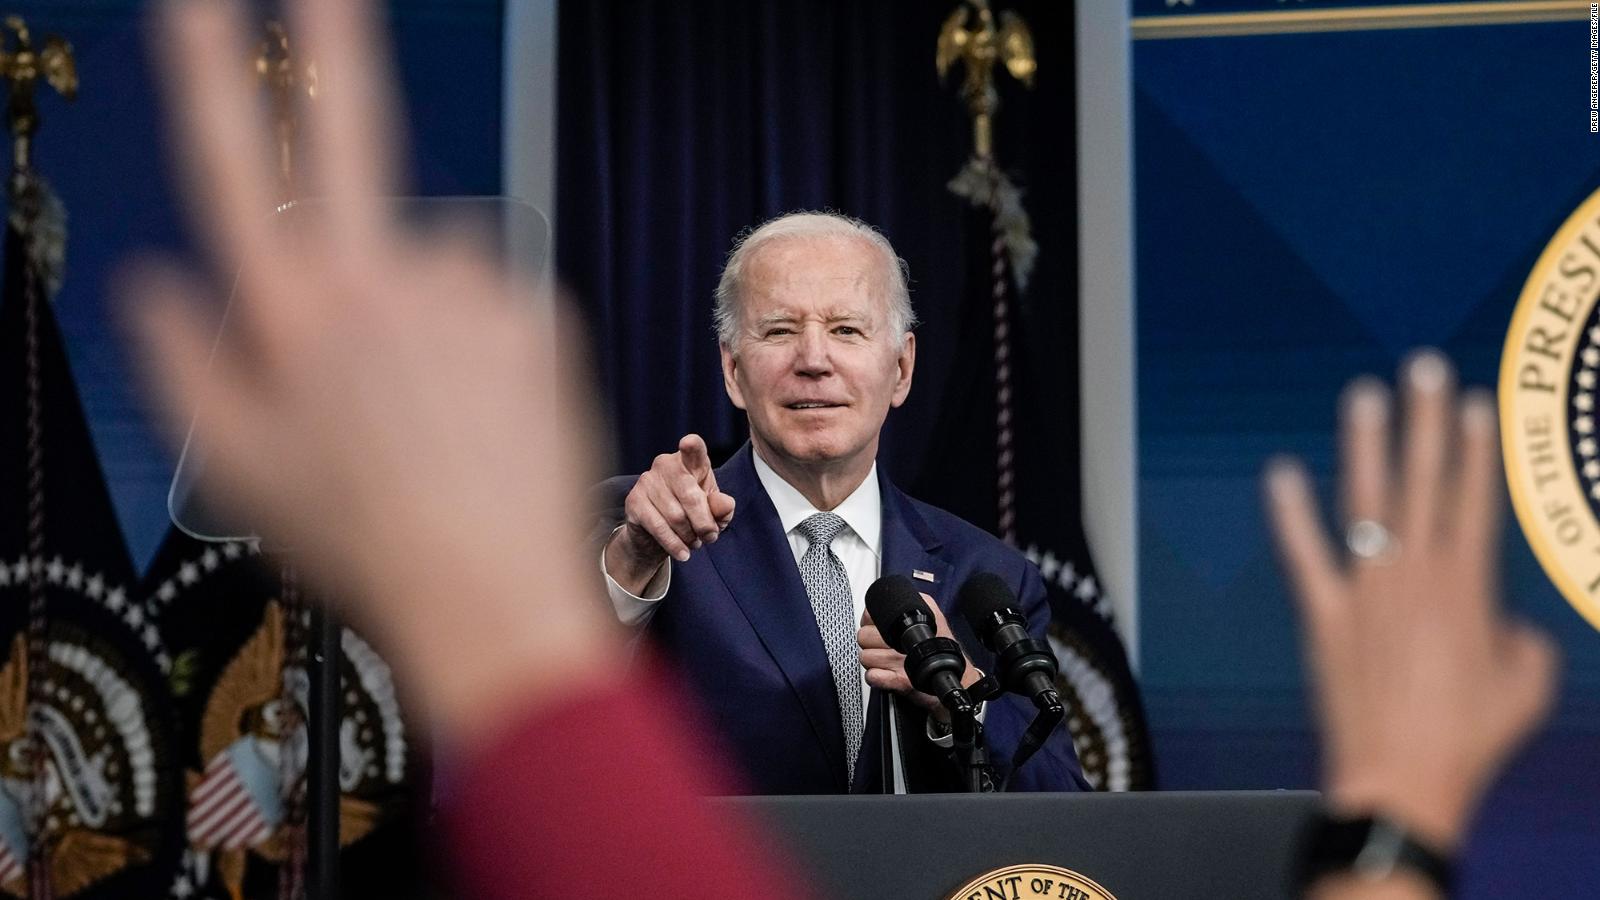 Biden faces potential failure at Summit of the Americas